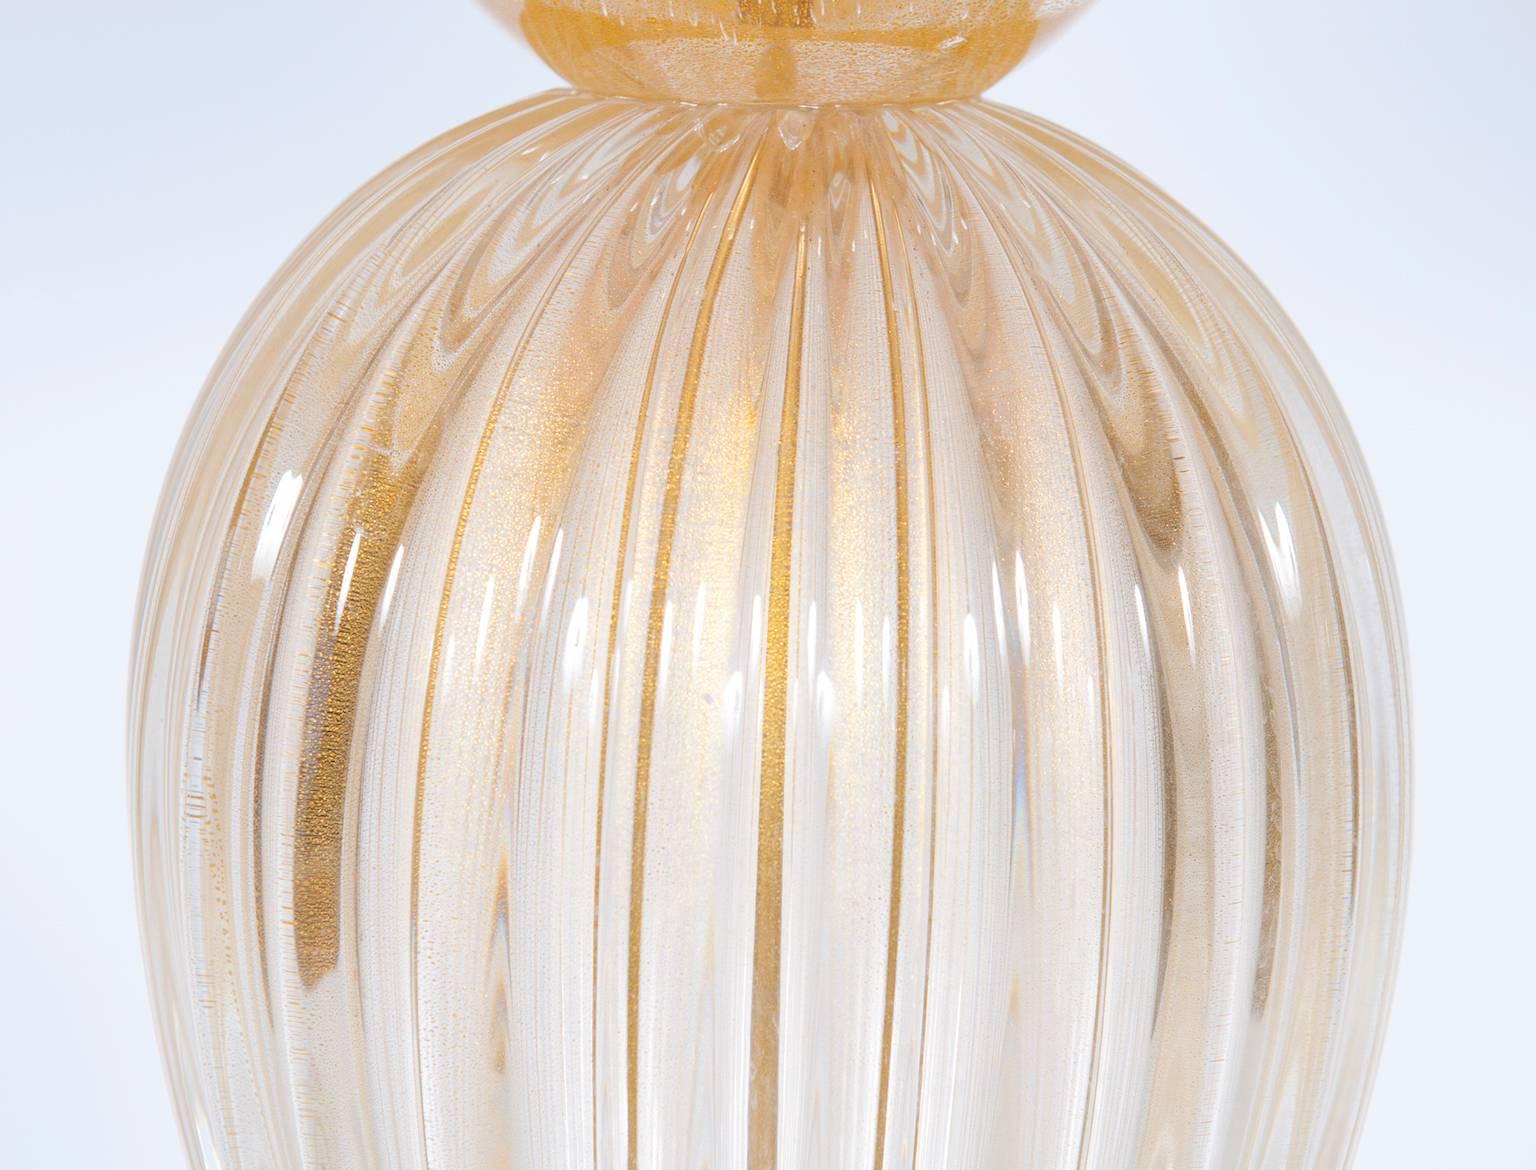 Late 20th Century Italian Venetian Murano Glass Table Lamp Attributed to Seguso, 1970s For Sale